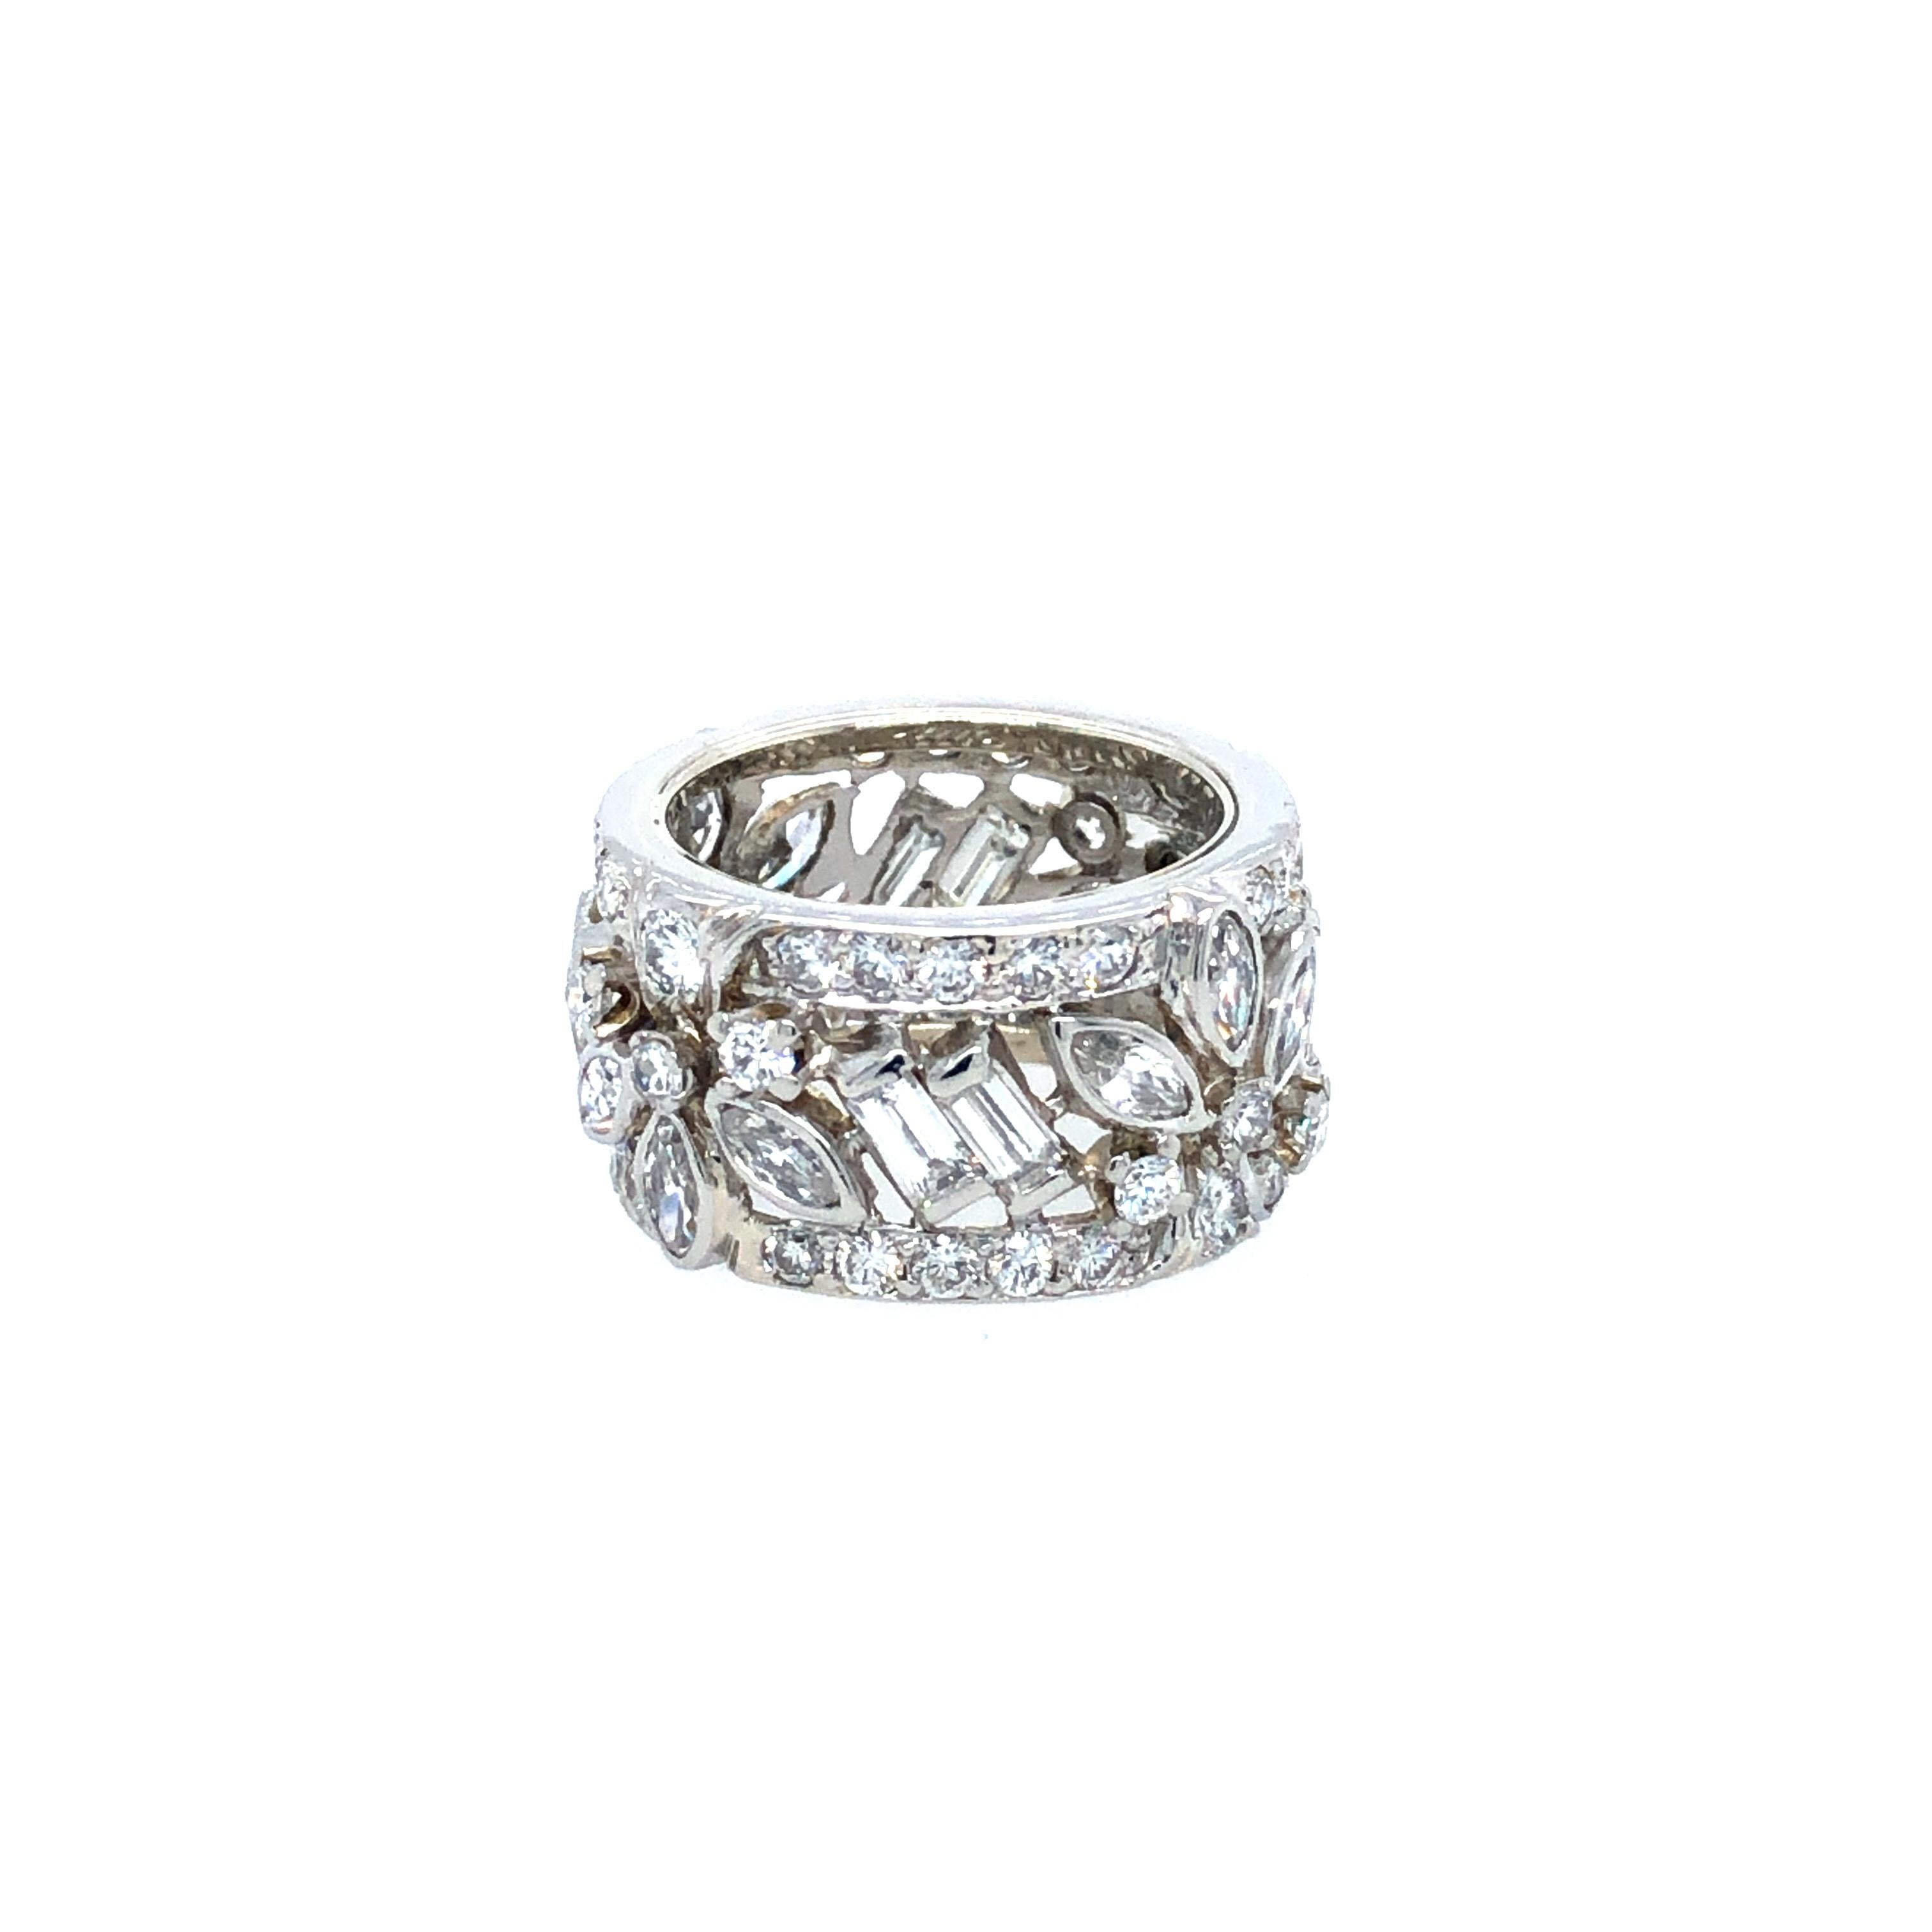 Offered here is a one of a kind platinum band, custom made circa 1960. 
An open work design band, adorned with 116 natural earth mined diamonds, 12 marquise shapes, 8 straight baguette cut and 96 transitional round cut diamonds weighing